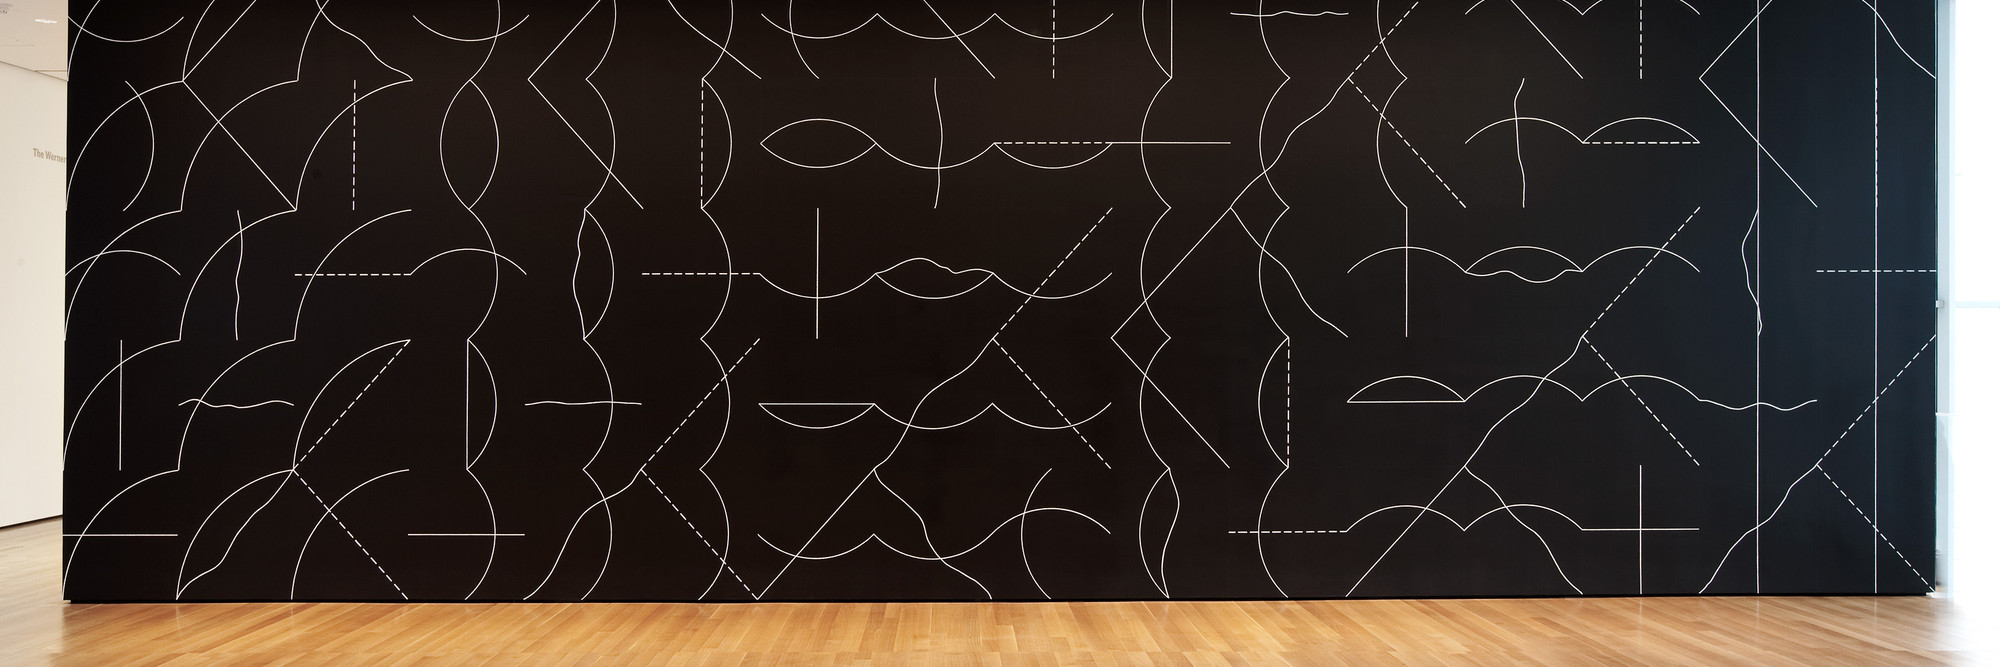 Installation view of Sol LeWitt’s Wall Drawing #260 at The Museum of Modern Art, 2008. Sol LeWitt. Wall Drawing #260. 1975. Chalk on painted wall, dimensions variable. Gift of an anonymous donor. © 2008 Sol LeWitt/Artists Rights Society (ARS), New York. Photo © Jason Mandella